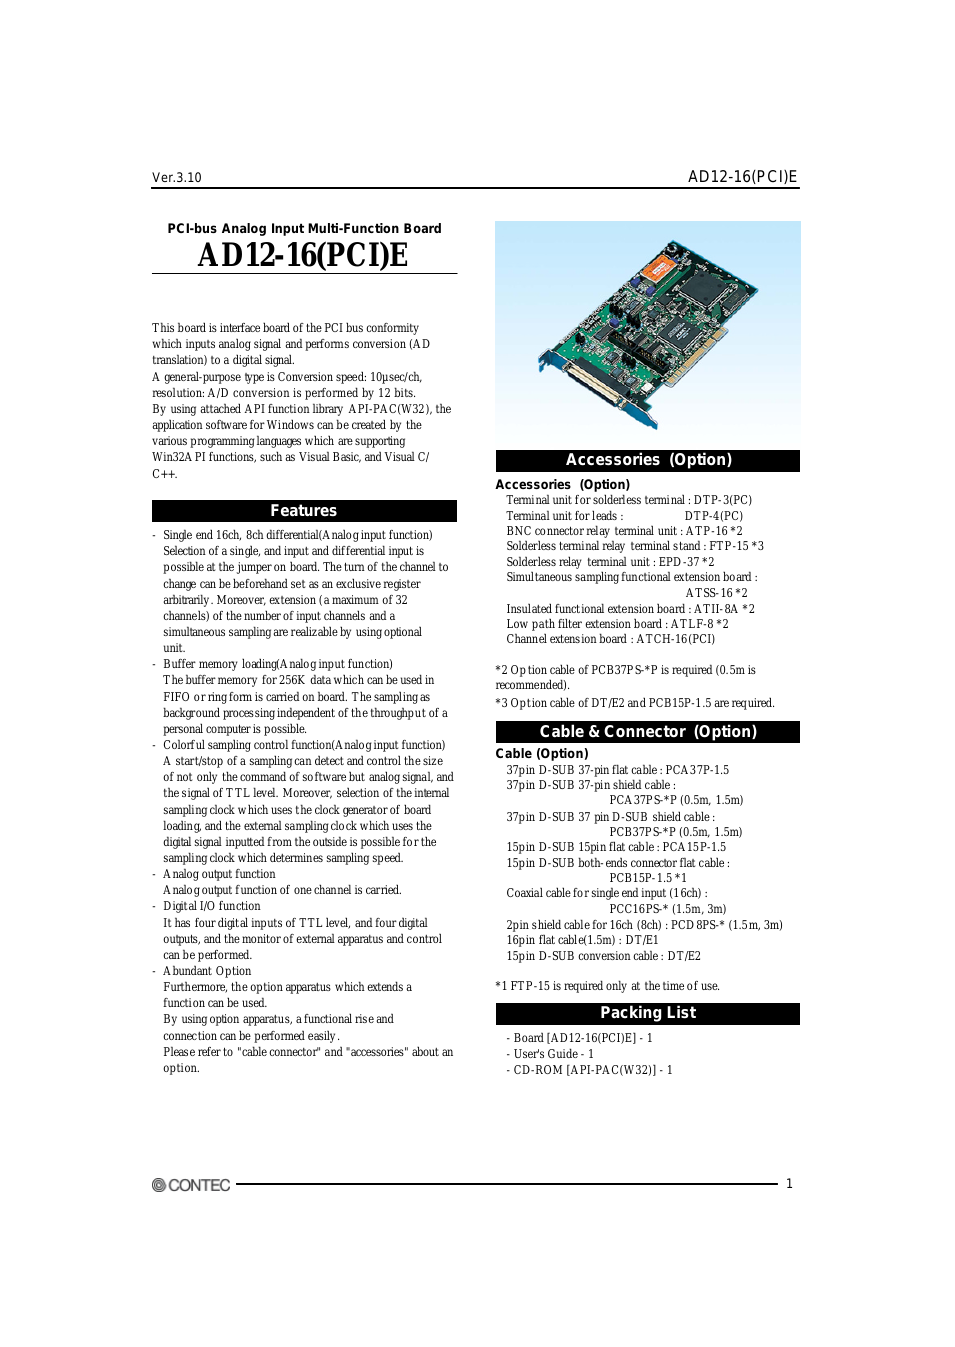 PC-I Bus Analog Input Multi Function Board AD12-16PCIE